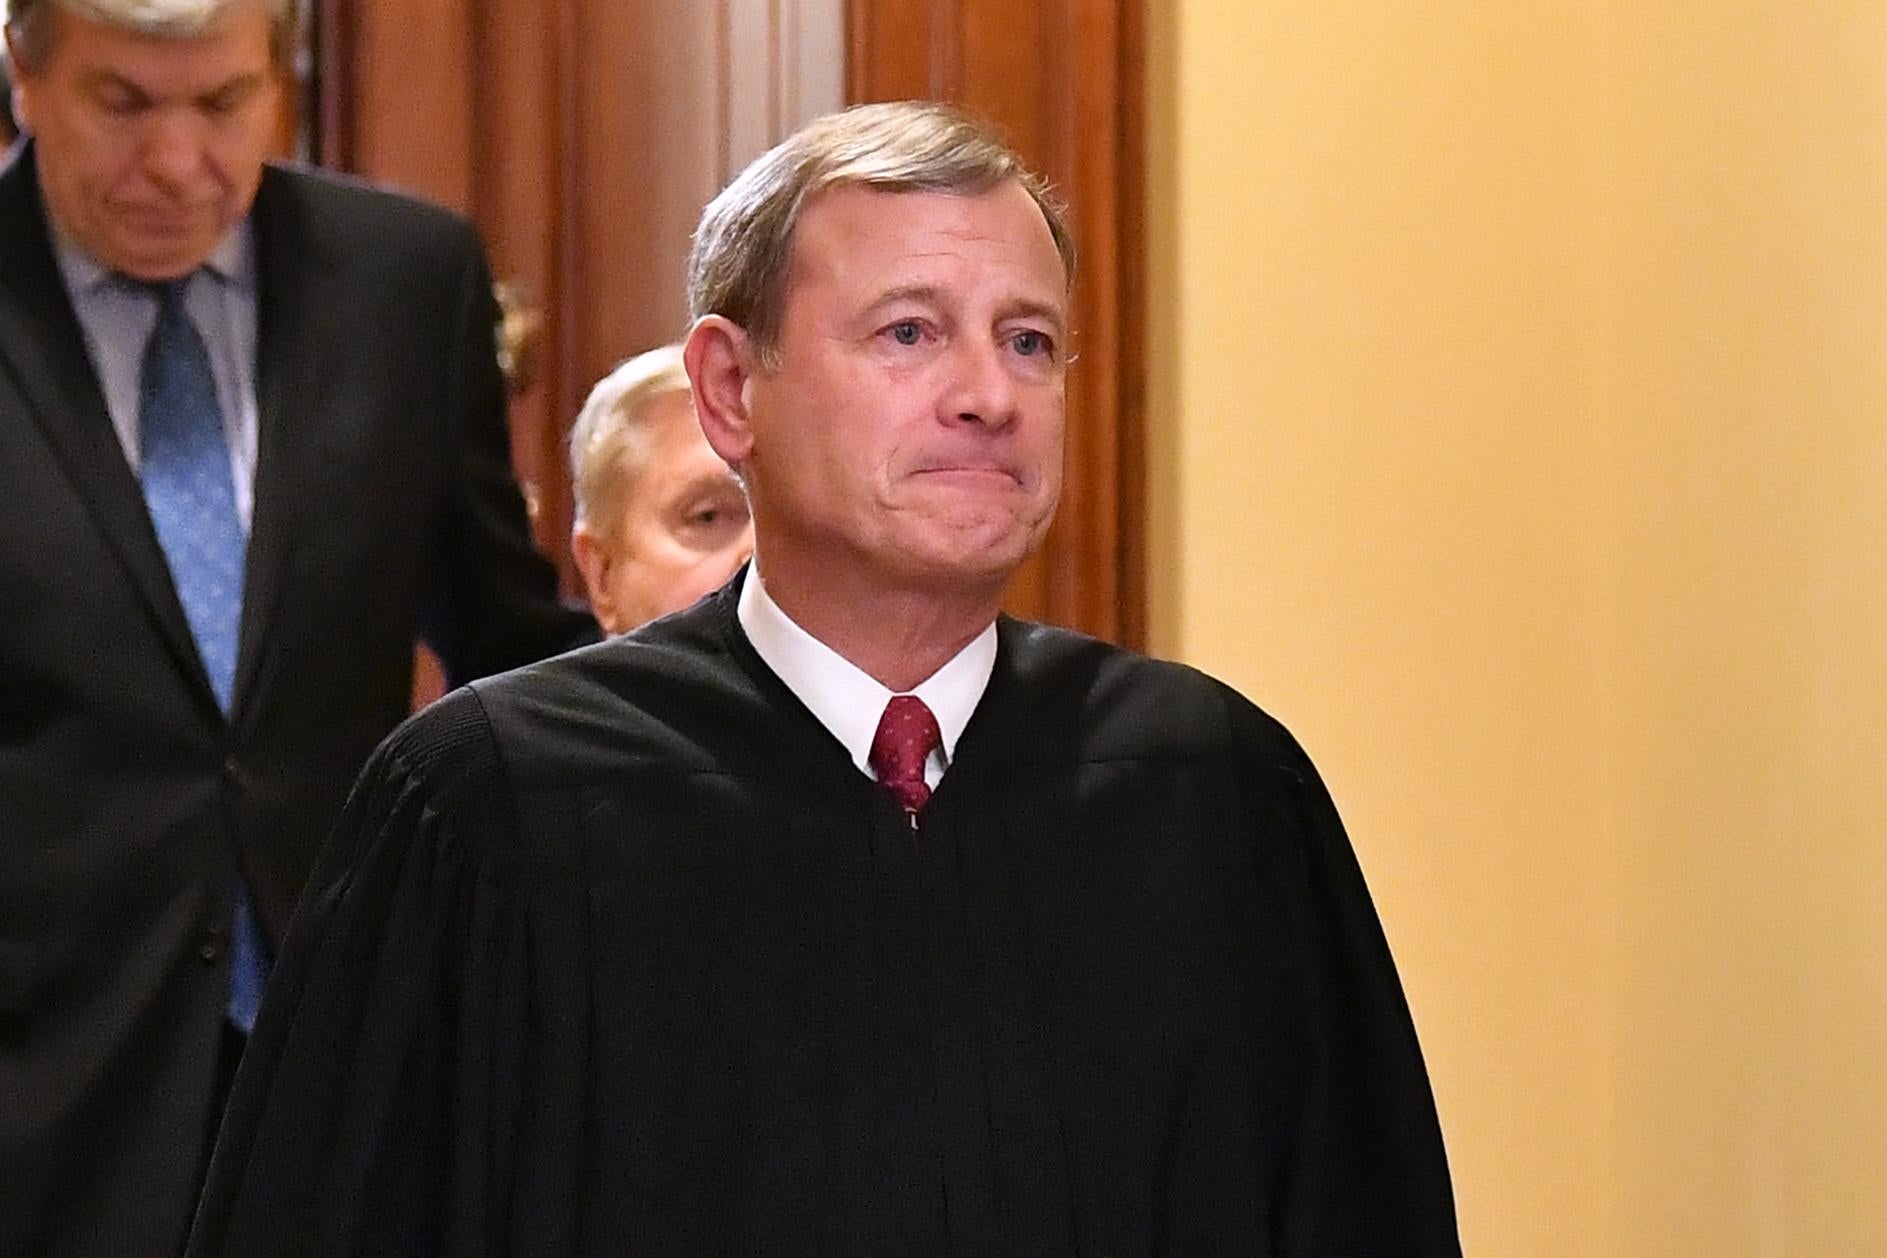 John Roberts, in robes, walks out of a room.